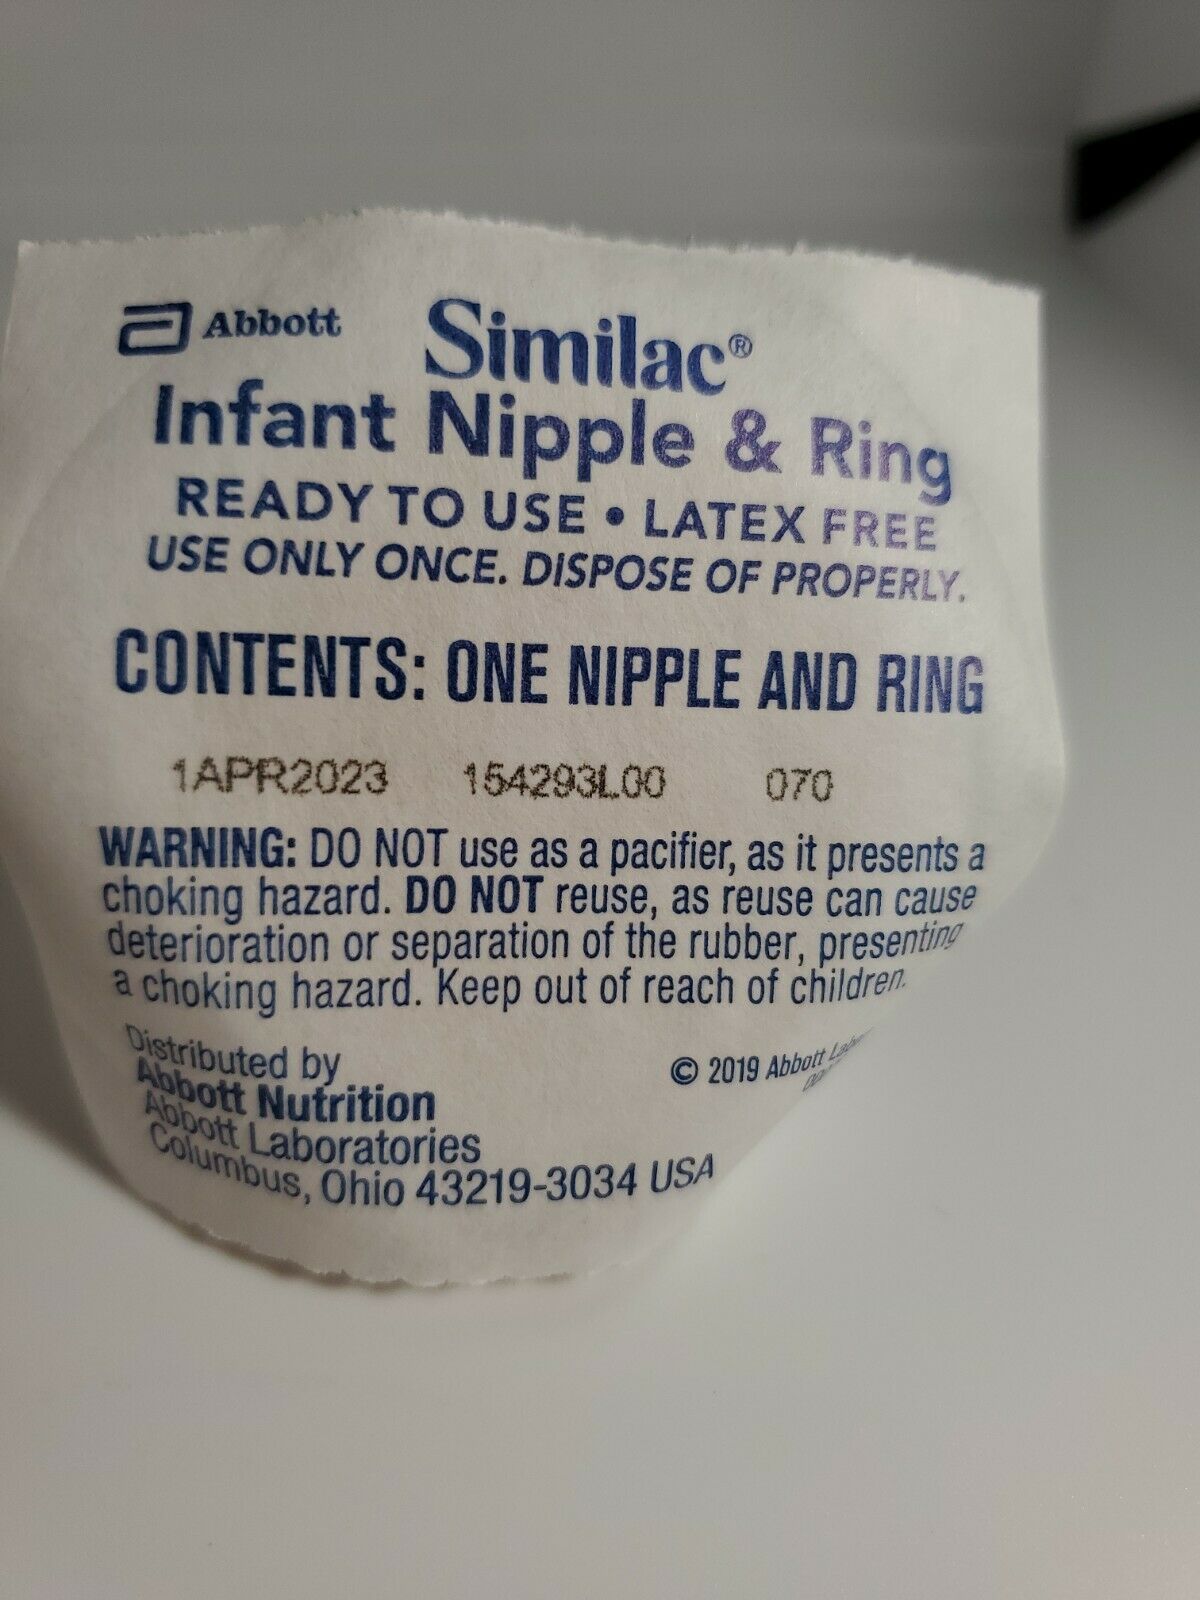 25 Similac Infant Baby Disposable Nipple And Ring Latex Free